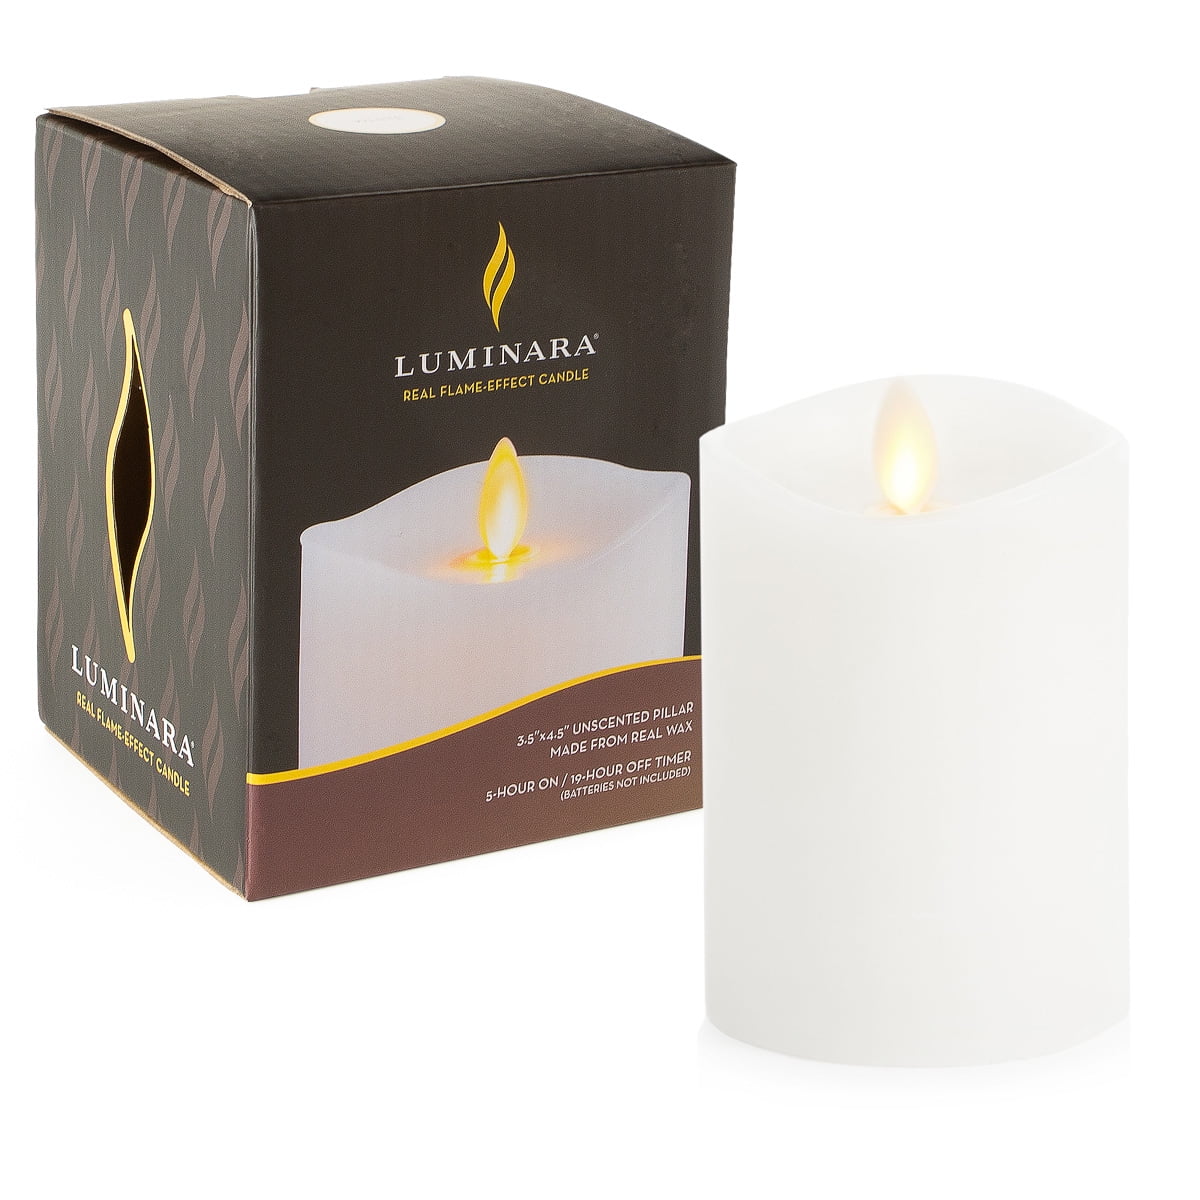 Luminara 3" x 4” White Unscented Wavy Edge Real-Flame Effect Flameless Candle 